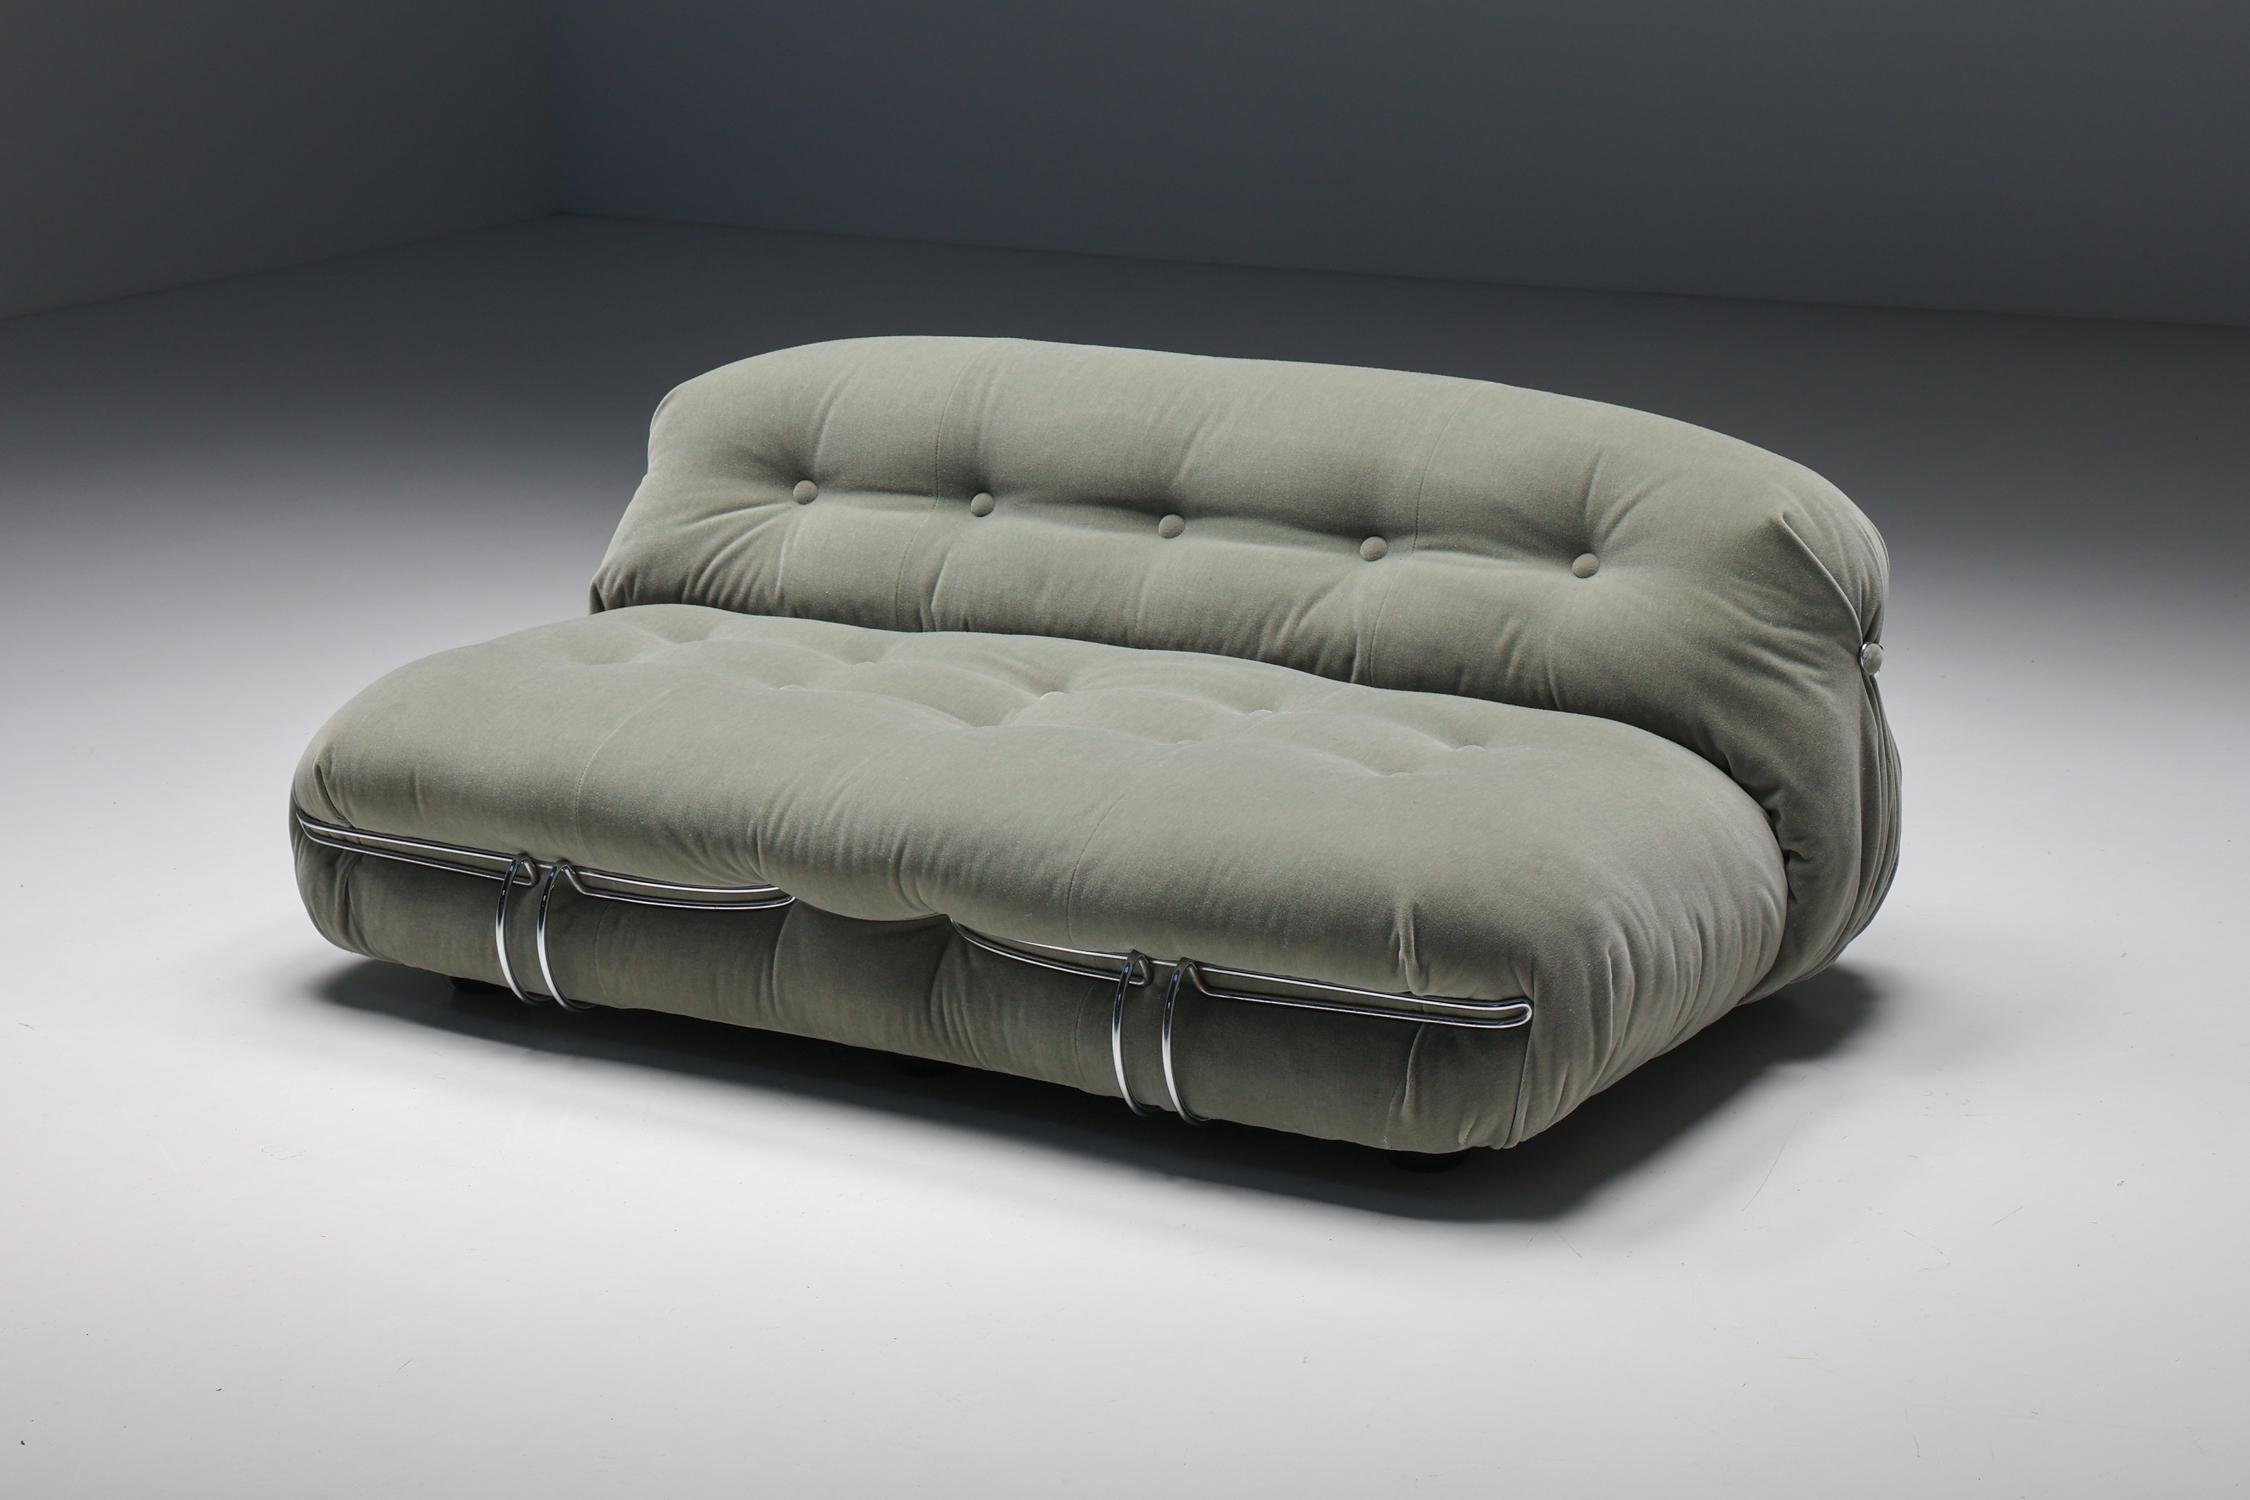 Scarpa; Afra & Tobia Scarpa; Soriana Sofa; Cassina; 1970s; Italian Design; Italy; Two Seater; Post-Modern; Green; Fabric; Mohair;

This Soriana two-seater sofa, reupholstered in 100% mohair, was designed by Afra & Tobia Scarpa and manufactured by